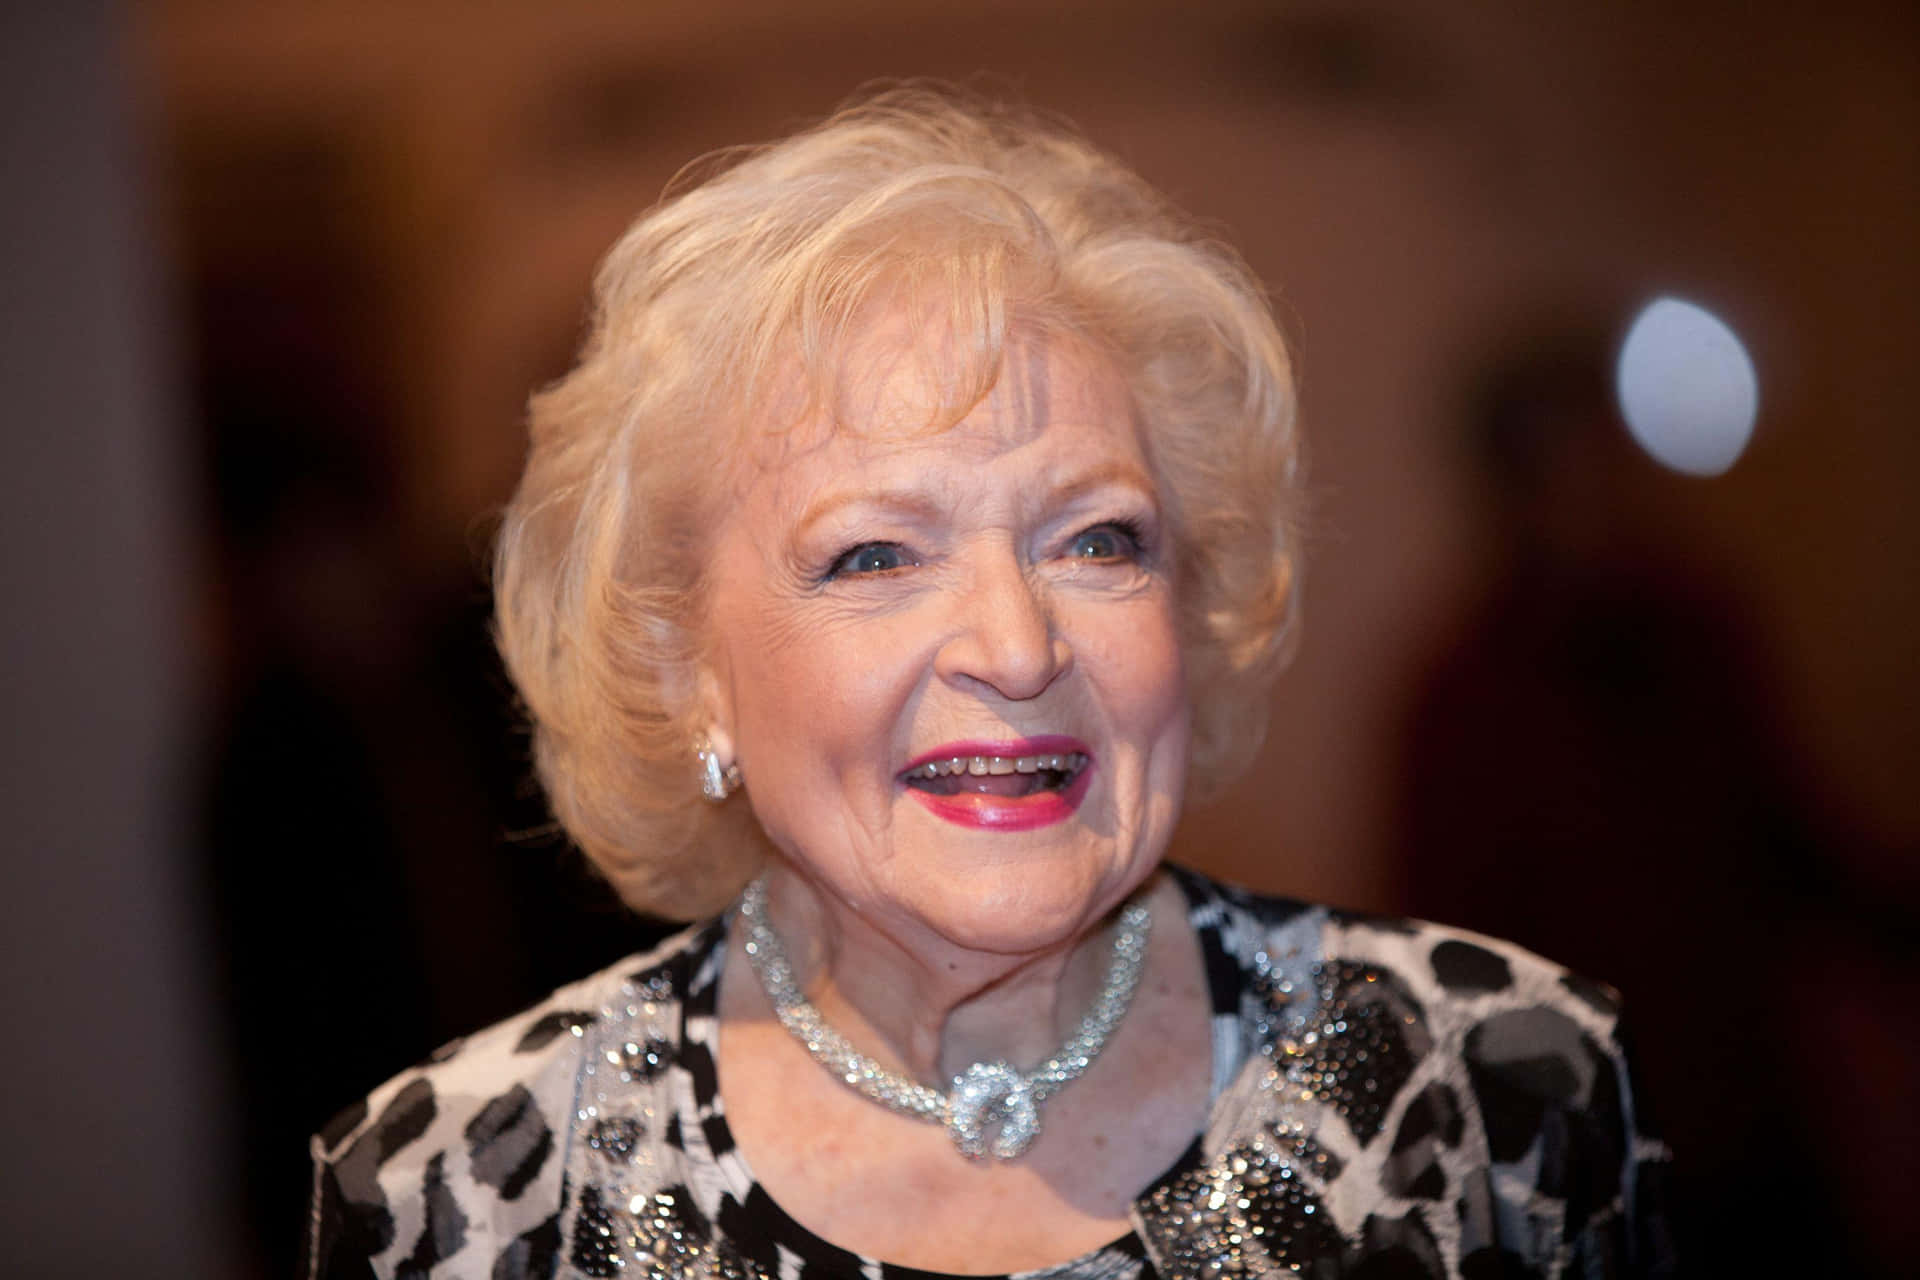 Betty White at a Hollywood event, smiling brightly